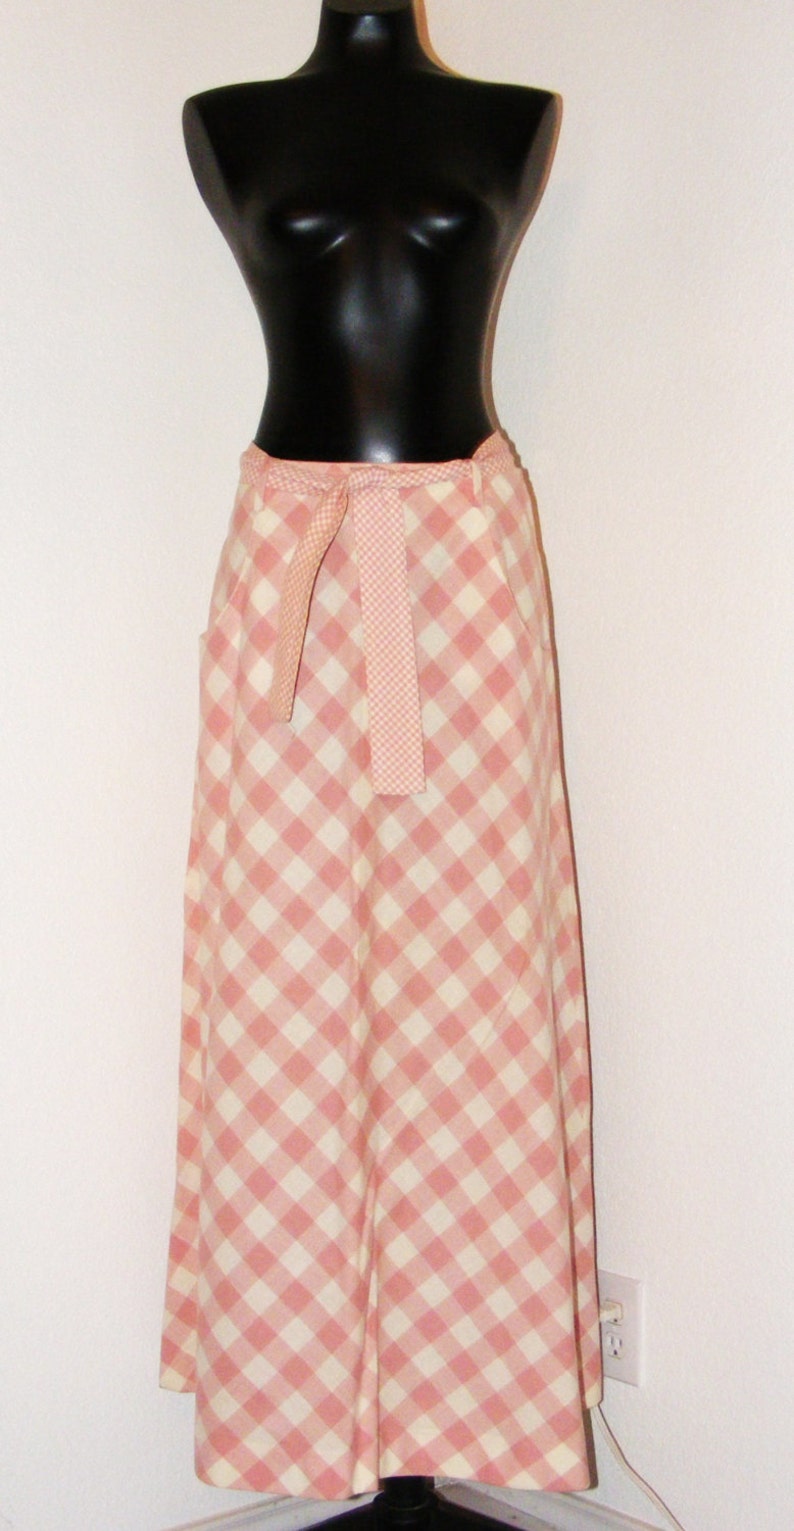 Vintage 1970s Pink & White Checkered Print Skirt by Sequel 1 image 1